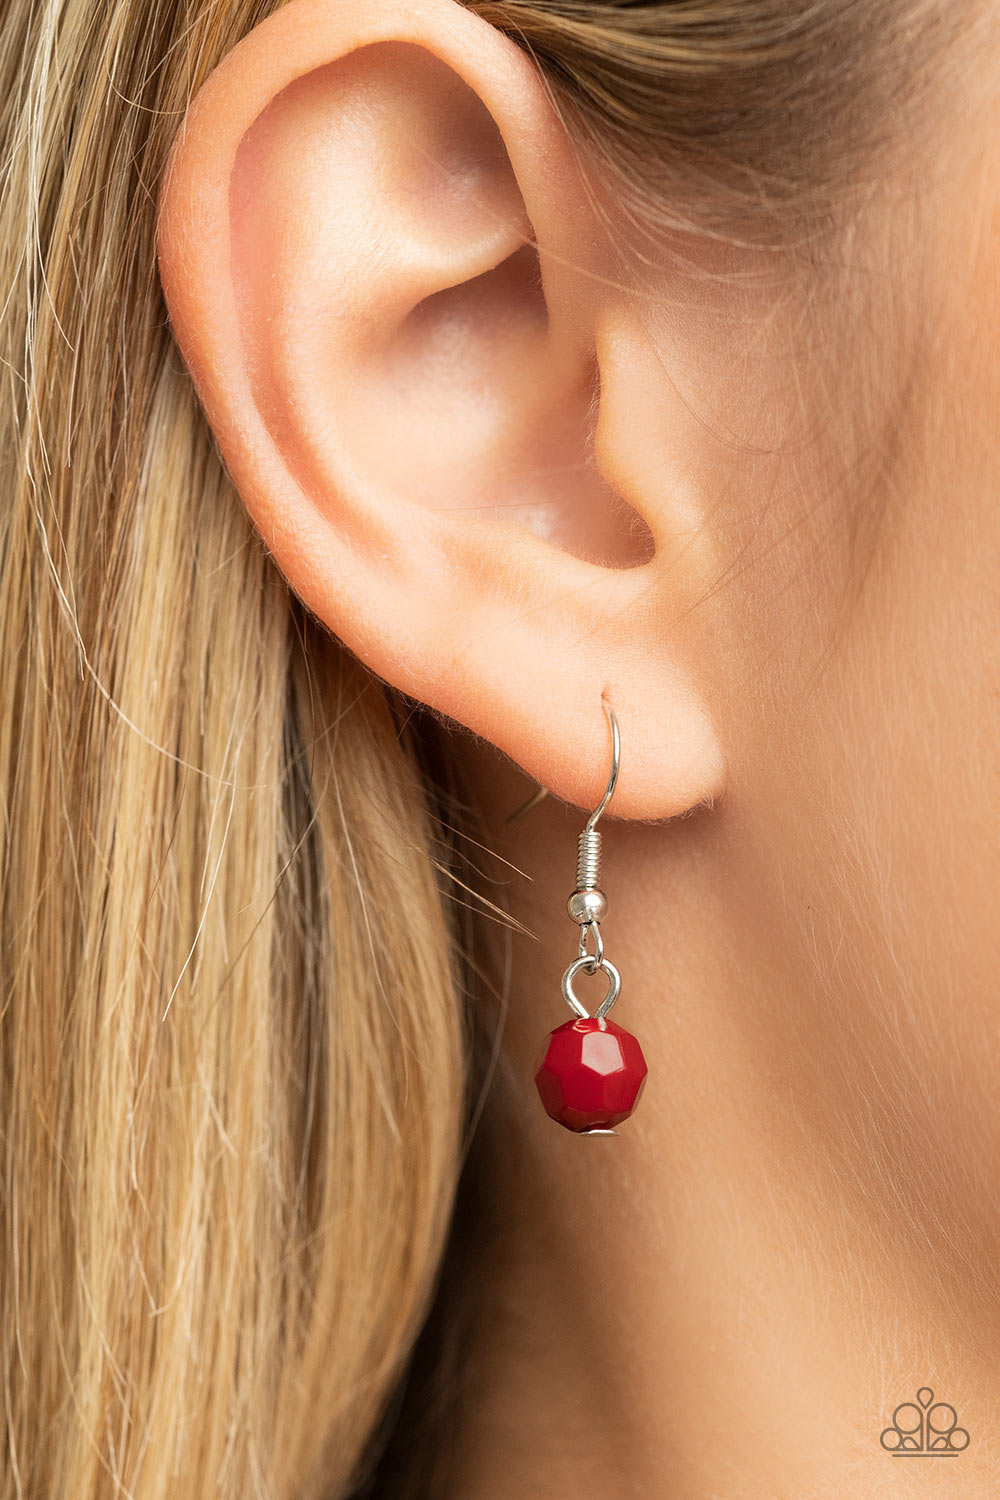 Valley Girl Glamour Red Necklace - Paparazzi Accessories  Encased in a sleek silver fitting, an oversized faceted wine teardrop bead swings from the bottom of a round wine bead and hammered silver hoop, culminating into a bold pop of color below the collar. Features an adjustable clasp closure.  Sold as one individual necklace. Includes one pair of matching earrings.